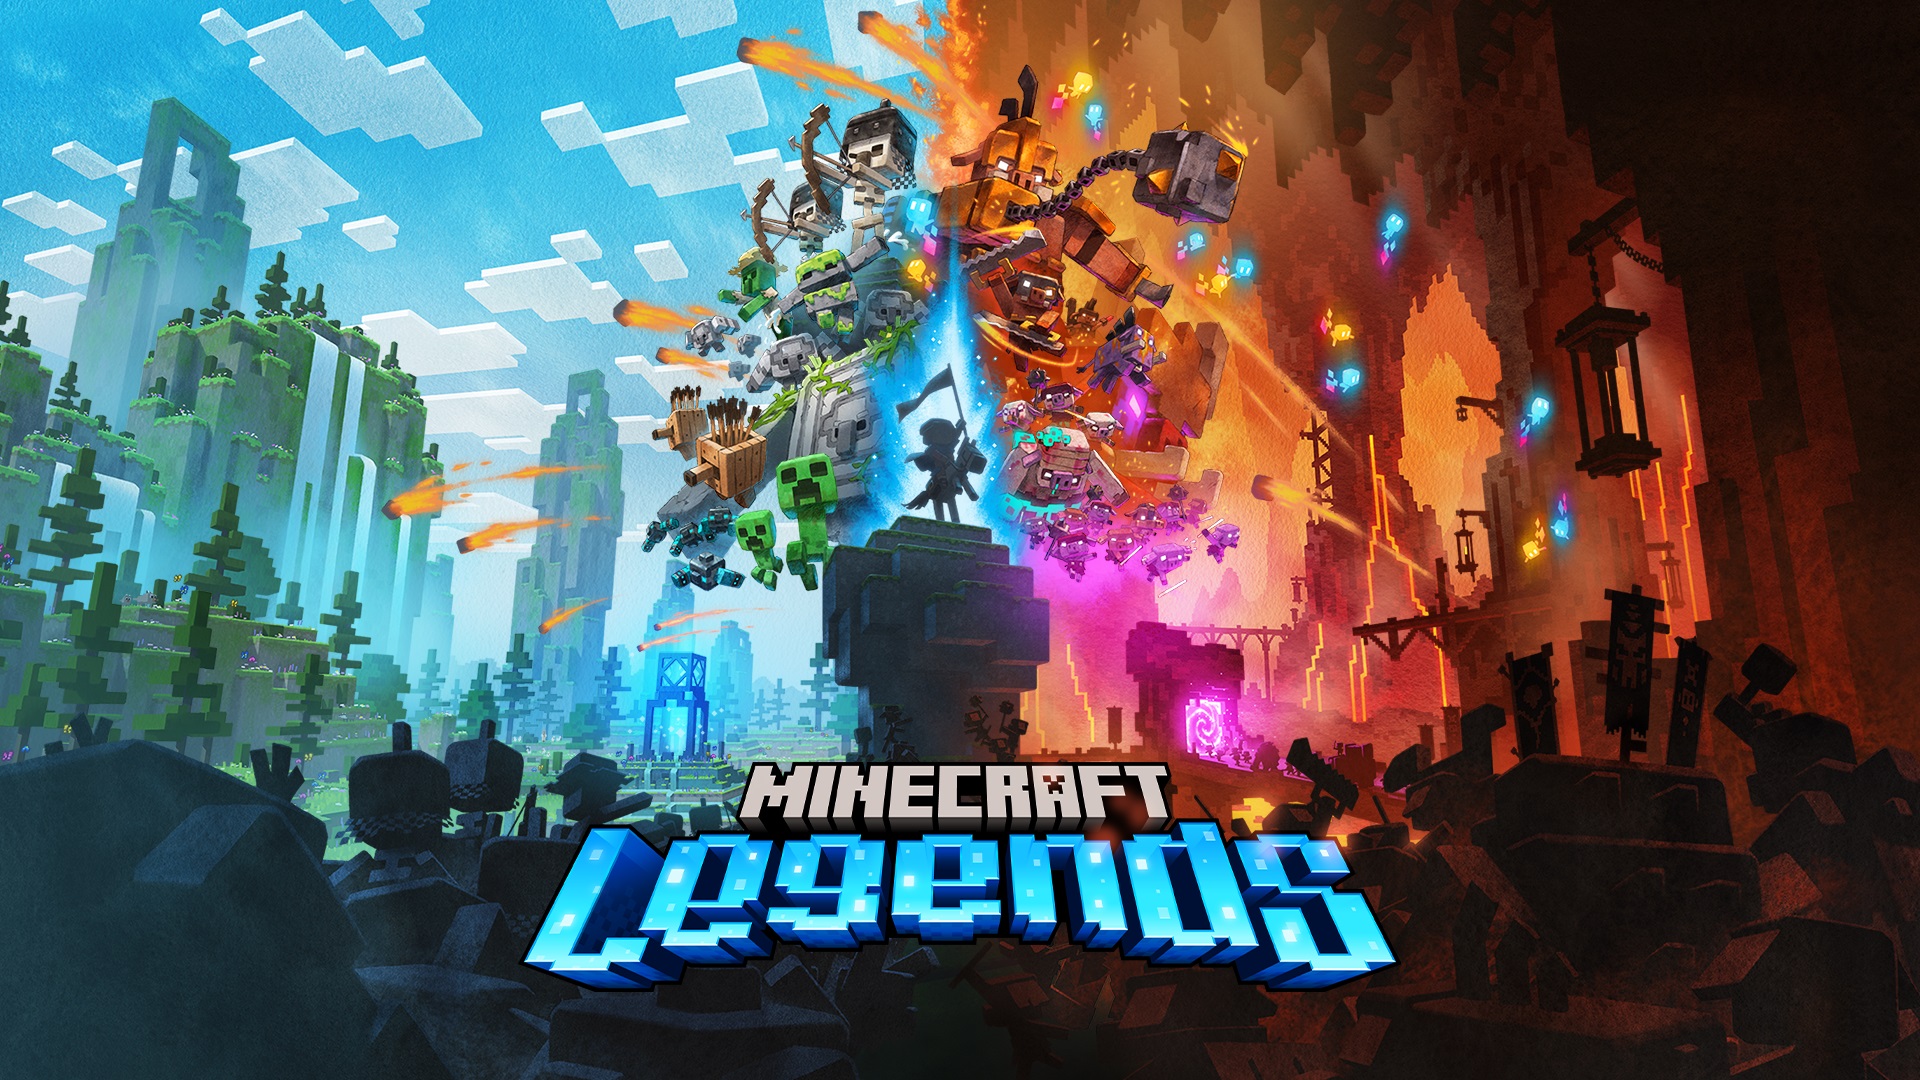 Minecraft Legends is an action-strategy spinoff coming next year